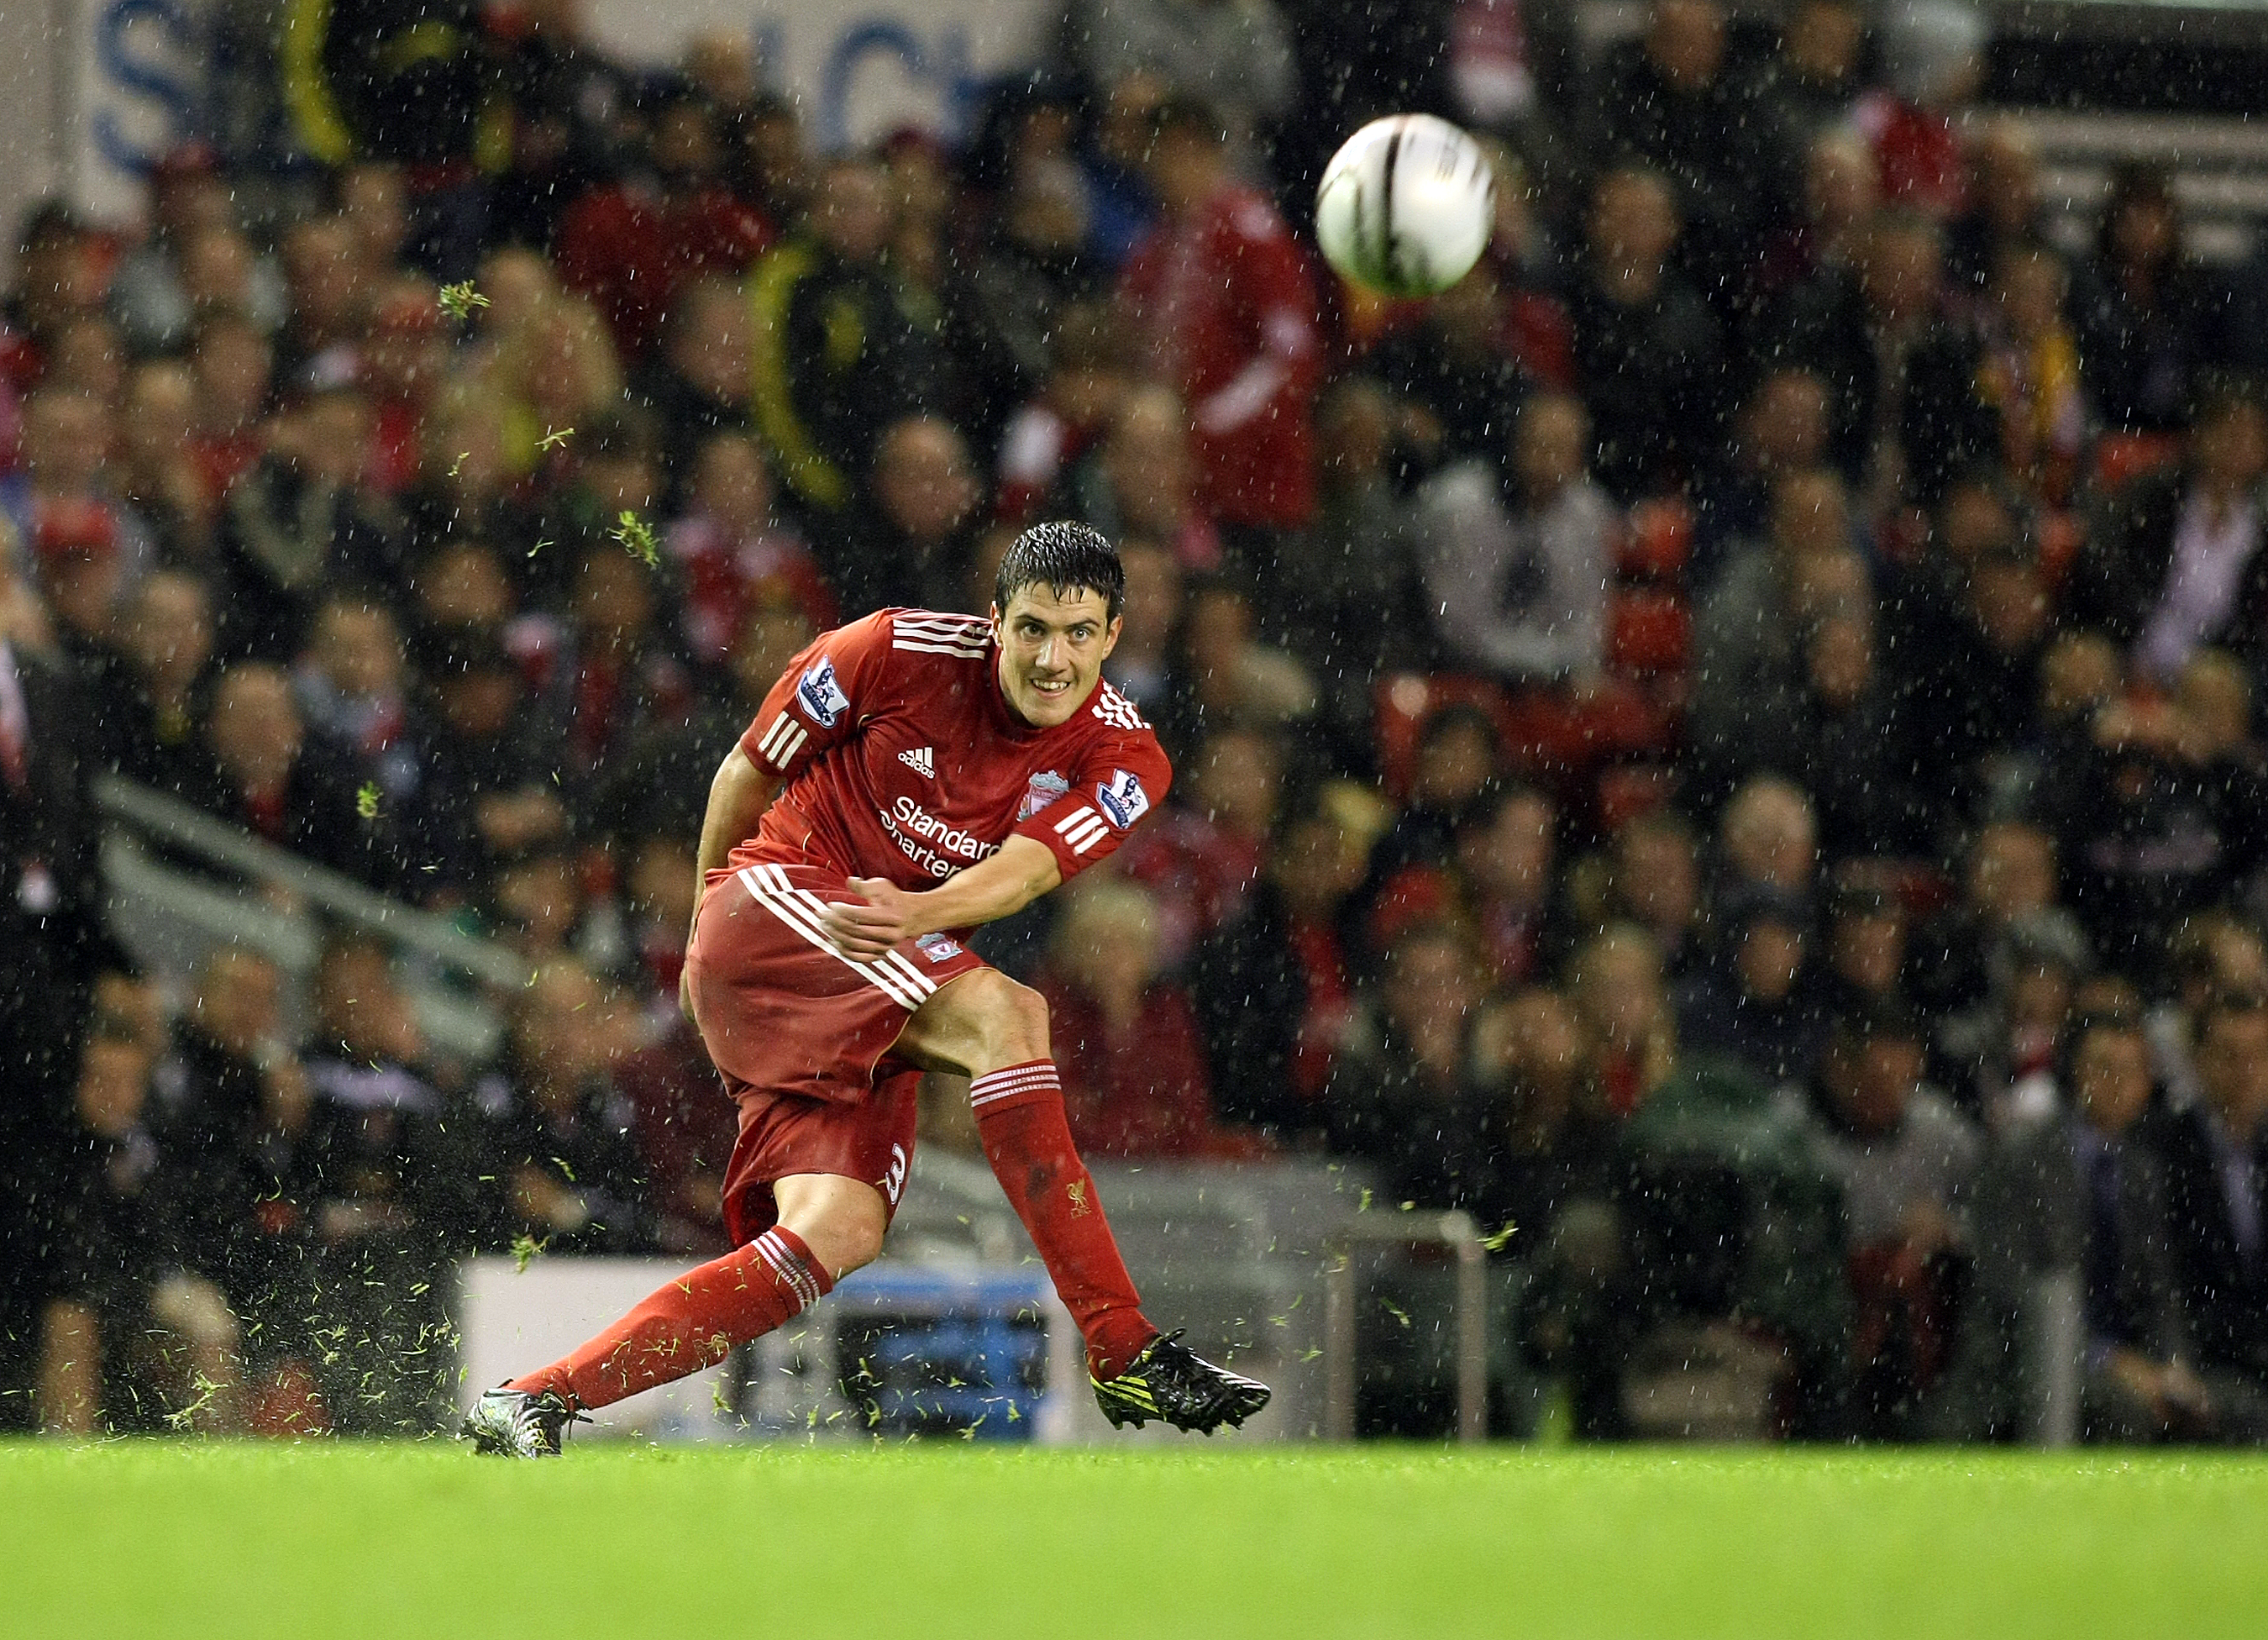 LIVERPOOL, ENGLAND - SEPTEMBER 22:  Martin Kelly of Liverpool in action during the Carling Cup Third Round match between Liverpool and Northampton Town at Anfield on September 22, 2010 in Liverpool, England. (Photo by Pete Norton/Getty Images)